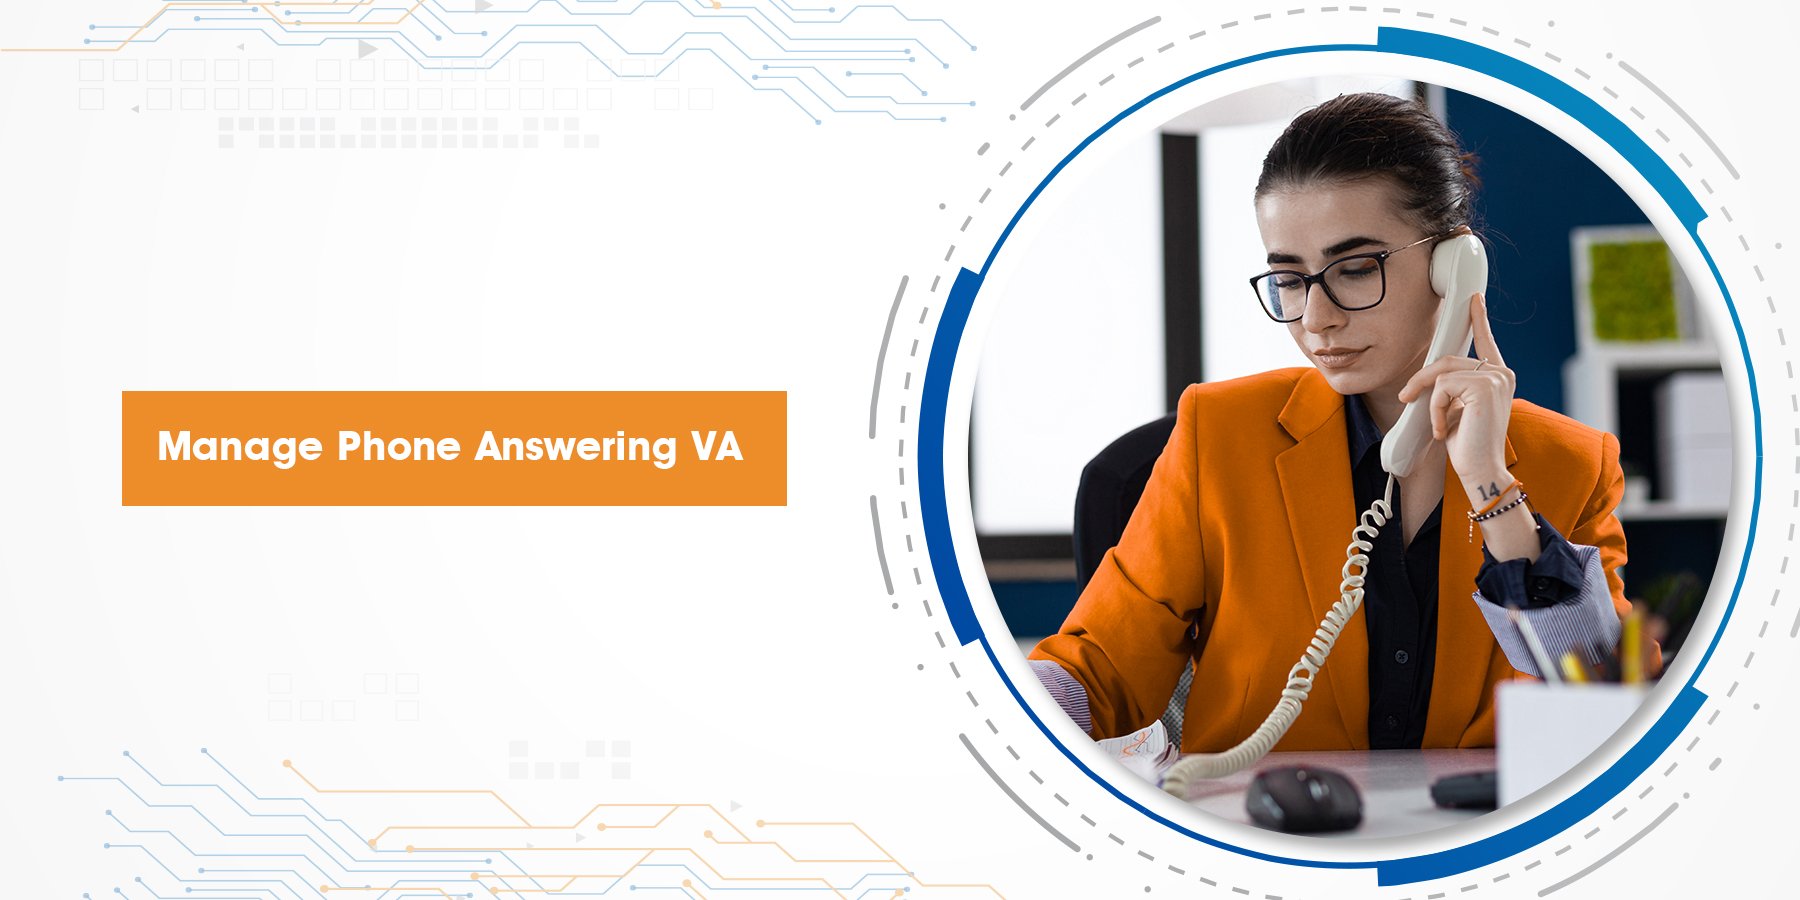 7 Tips to Manage Your Phone Answering Virtual Assistant